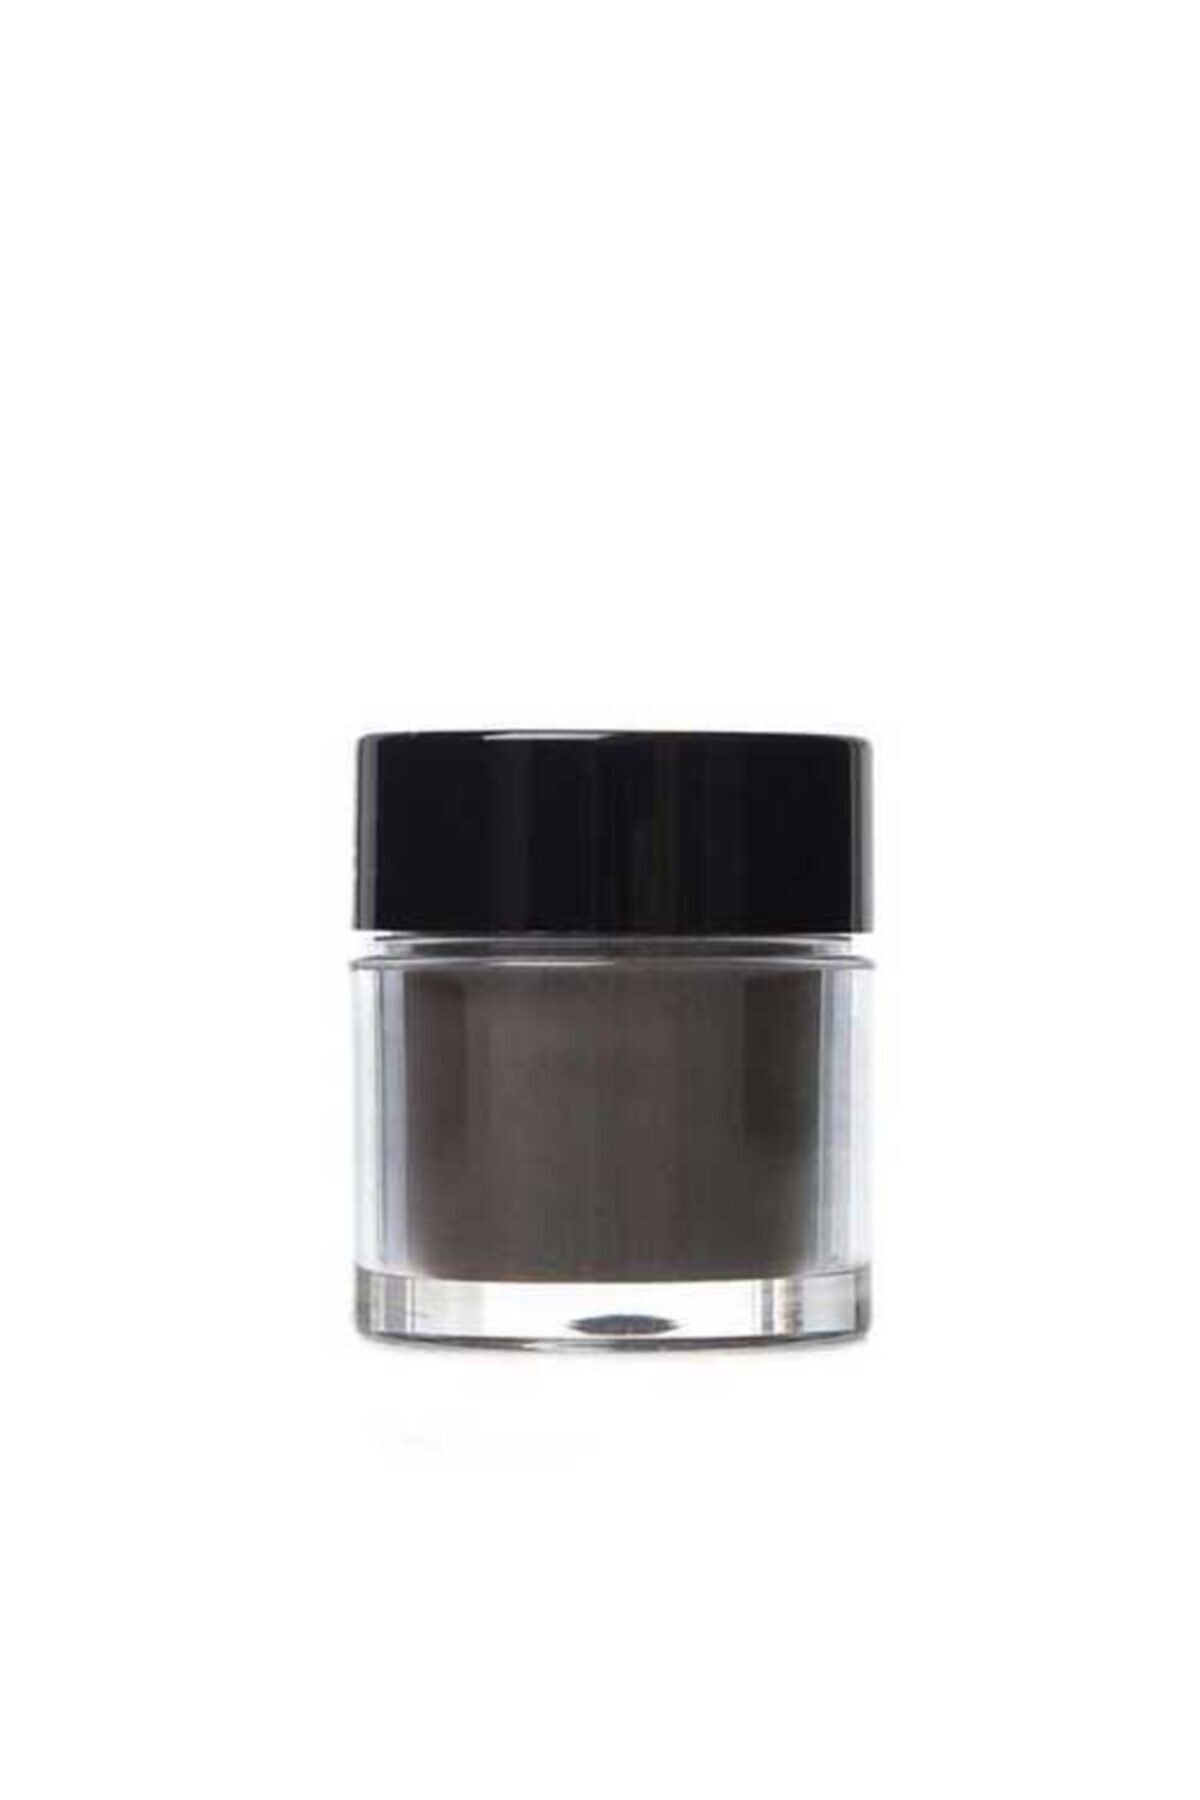 Youngblood Crushed Mineral Eyeshadow Toz Mineral Far 2 G ( Raven )